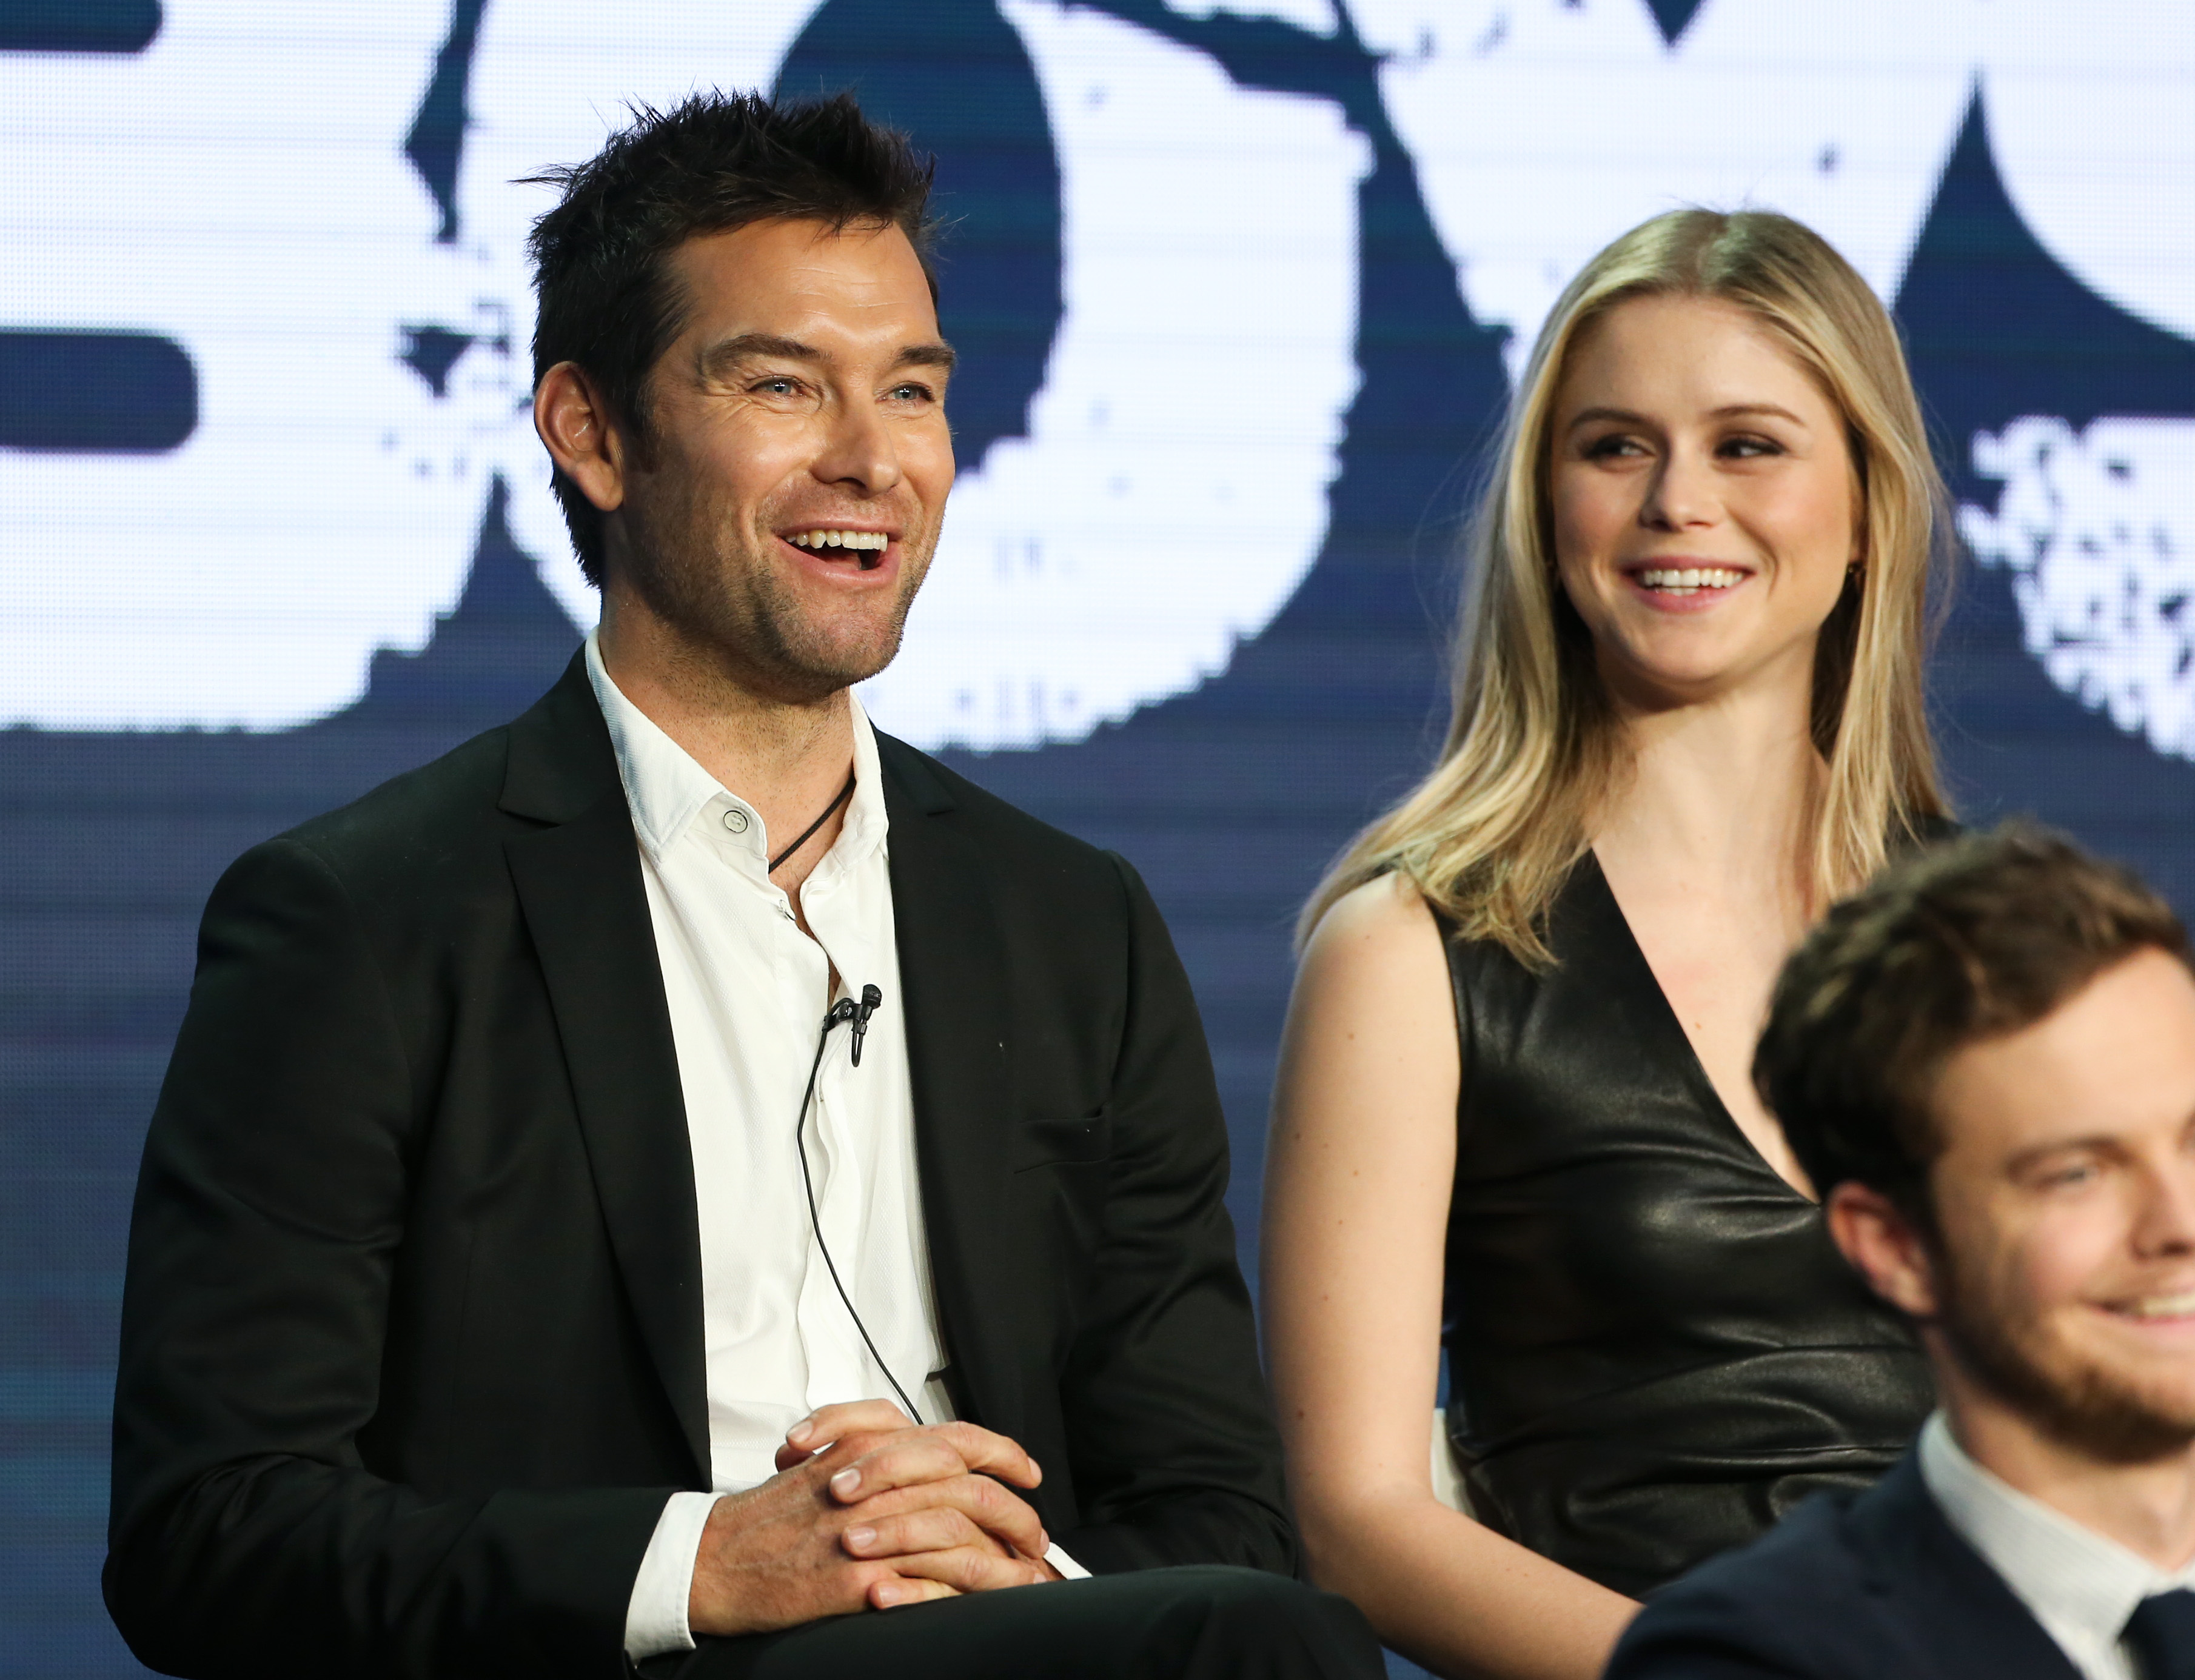 Antony Starr and Erin Moriarty during the Amazon Prime "The Boys" TV Show Panel, TCA Winter Press Tour, Los Angeles. | Source: Getty Images